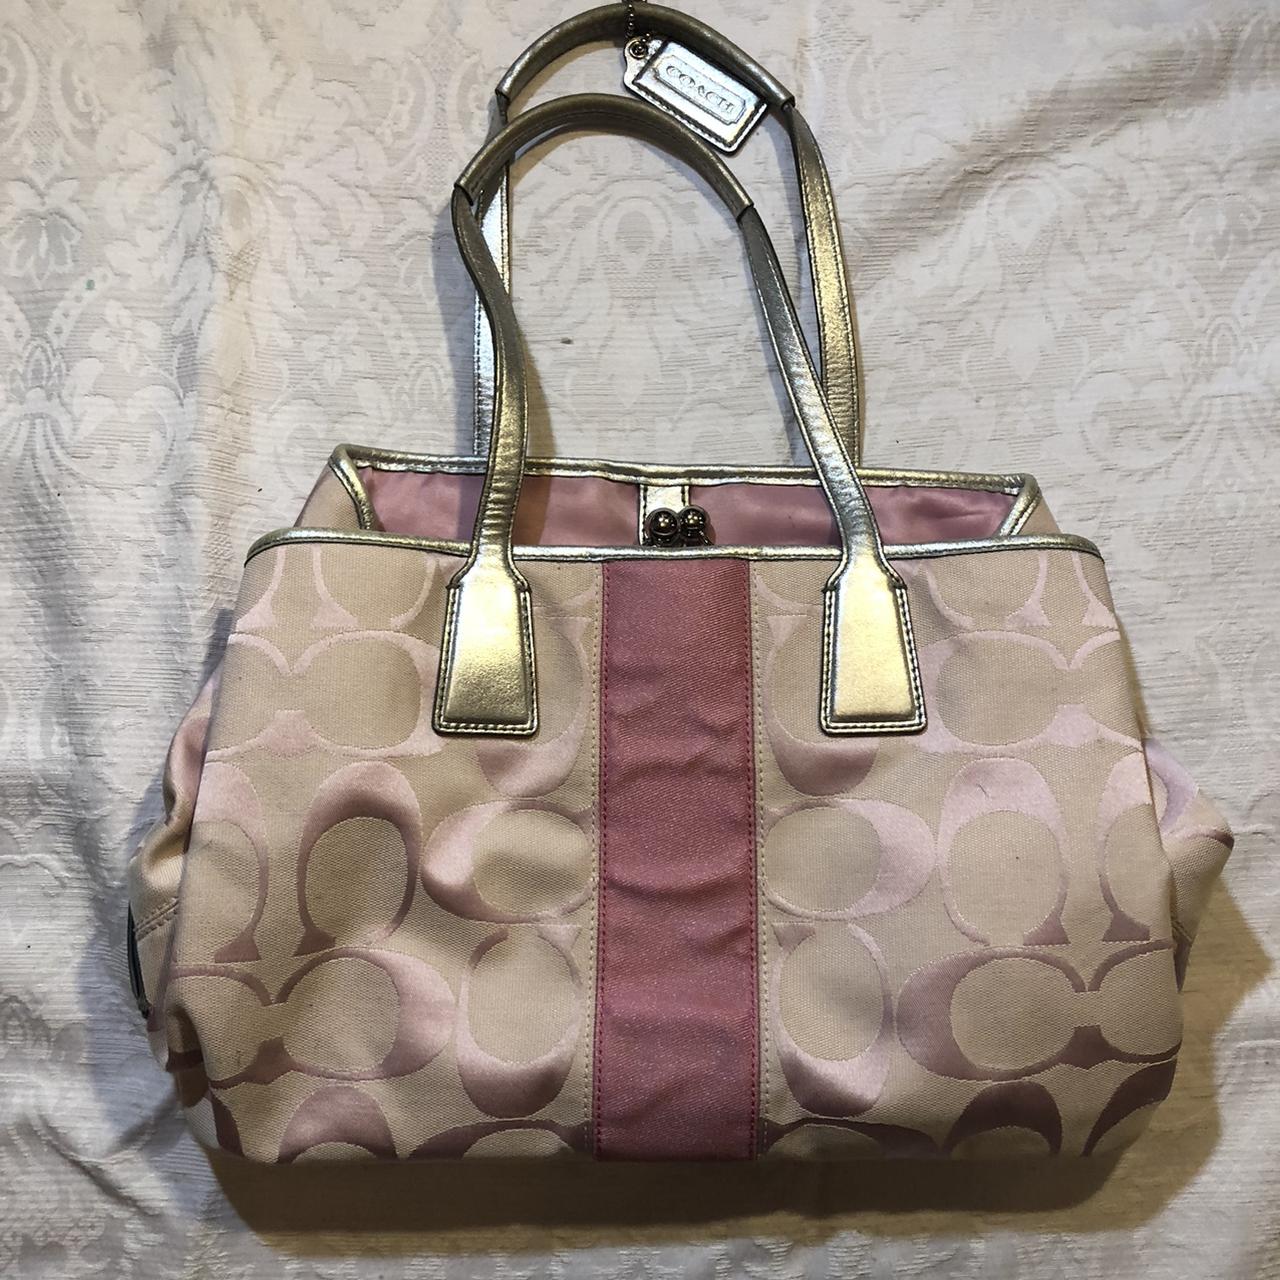 Coach, Bags, Coach Purse Pink And Brown